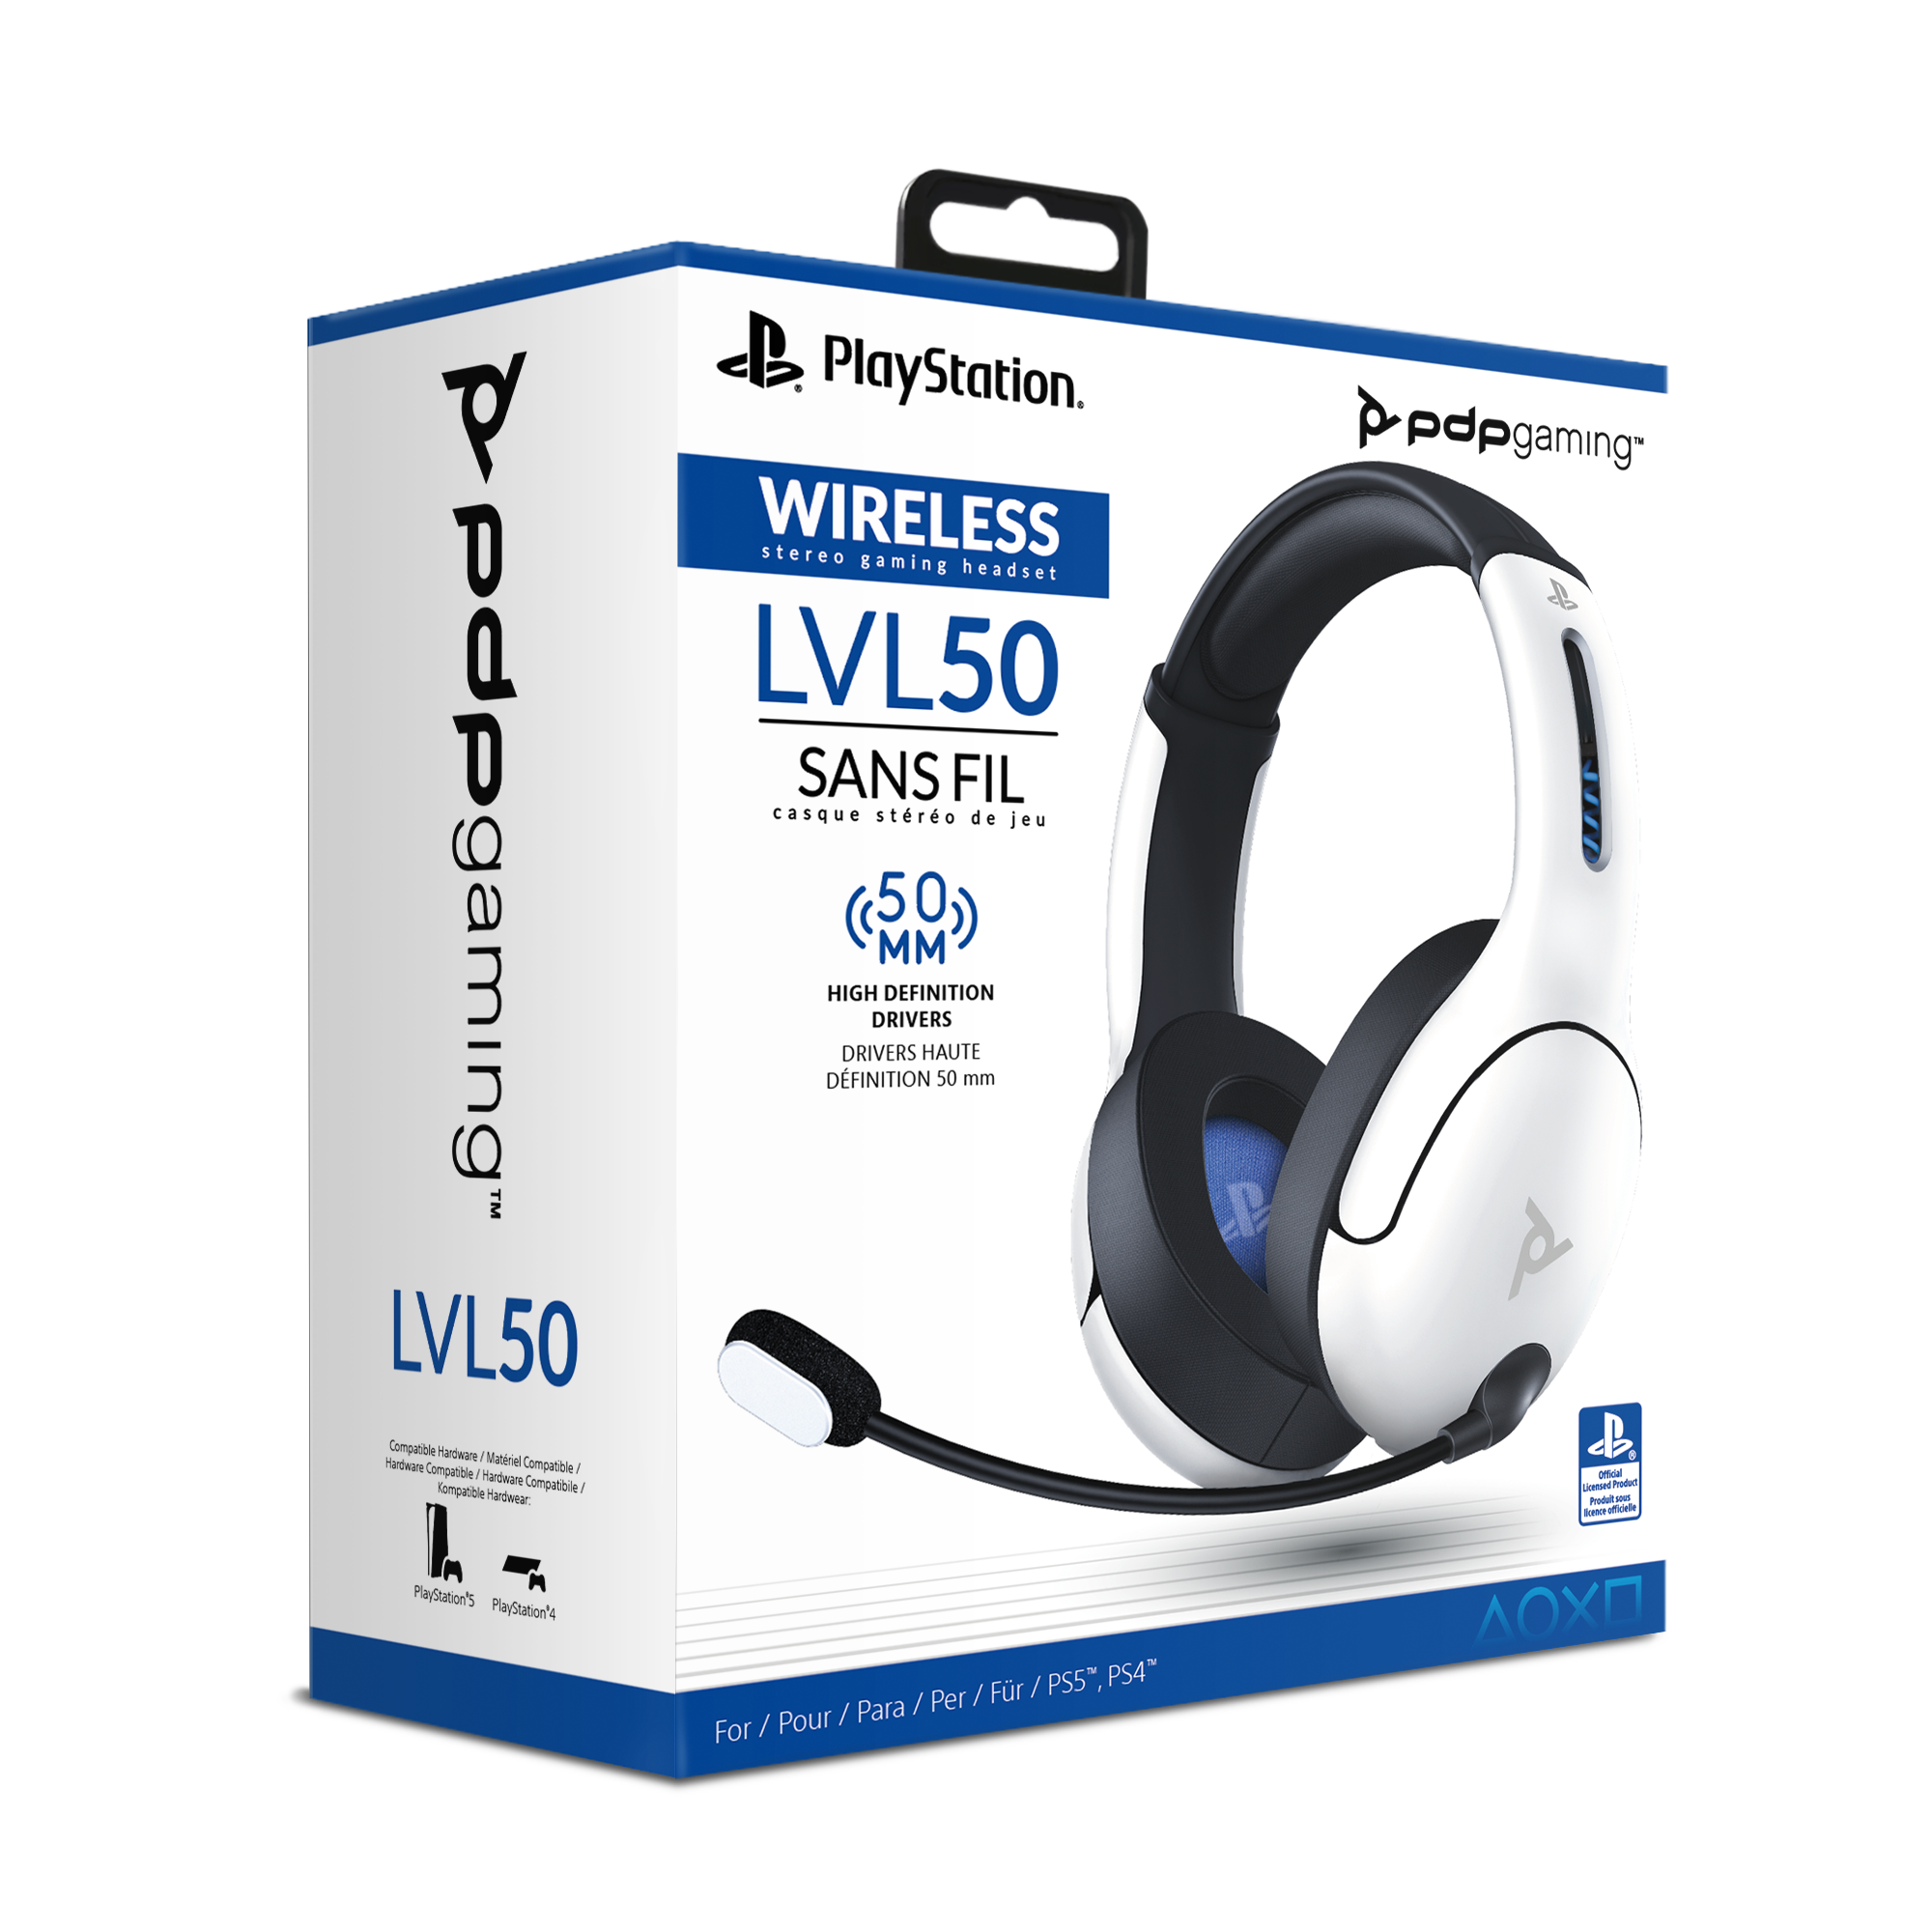 Stier Verbinding Wet en regelgeving PDP Gaming LVL50 Wireless Stereo Headset for PS4 White | PlayStation 4 |  GameStop